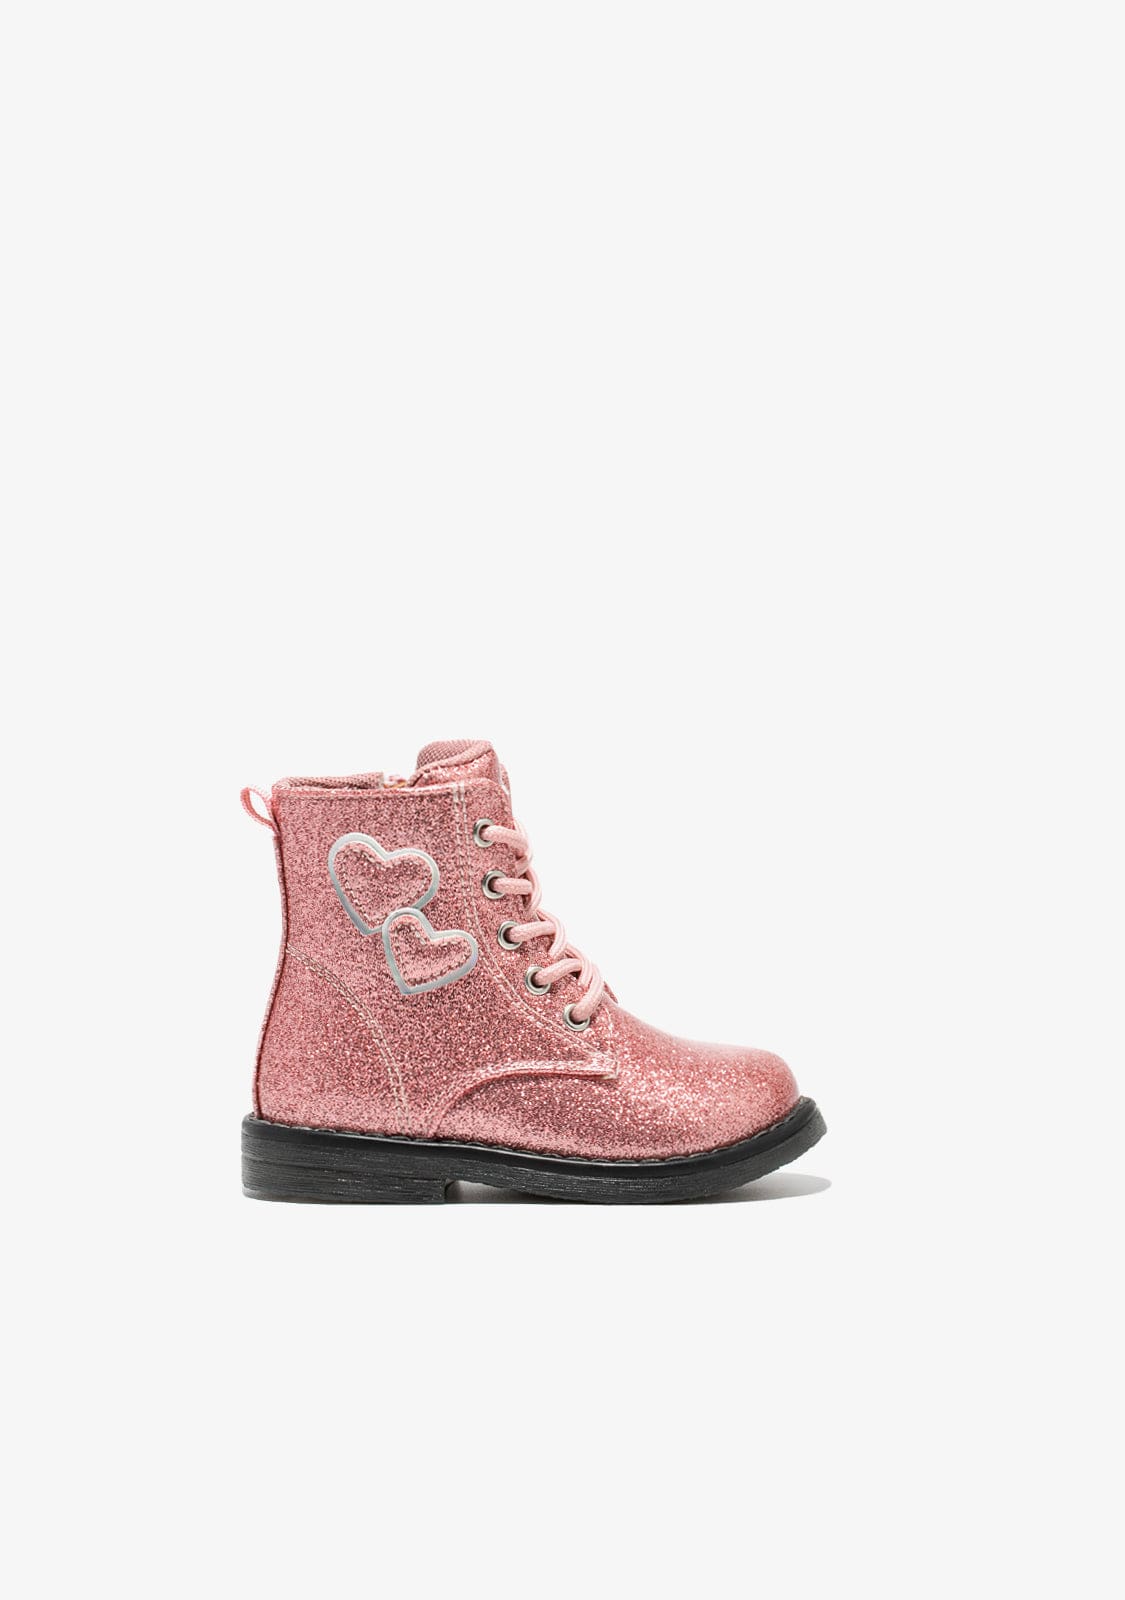 OSITO Shoes Baby's Pink Hearts Cord Ankle Boots